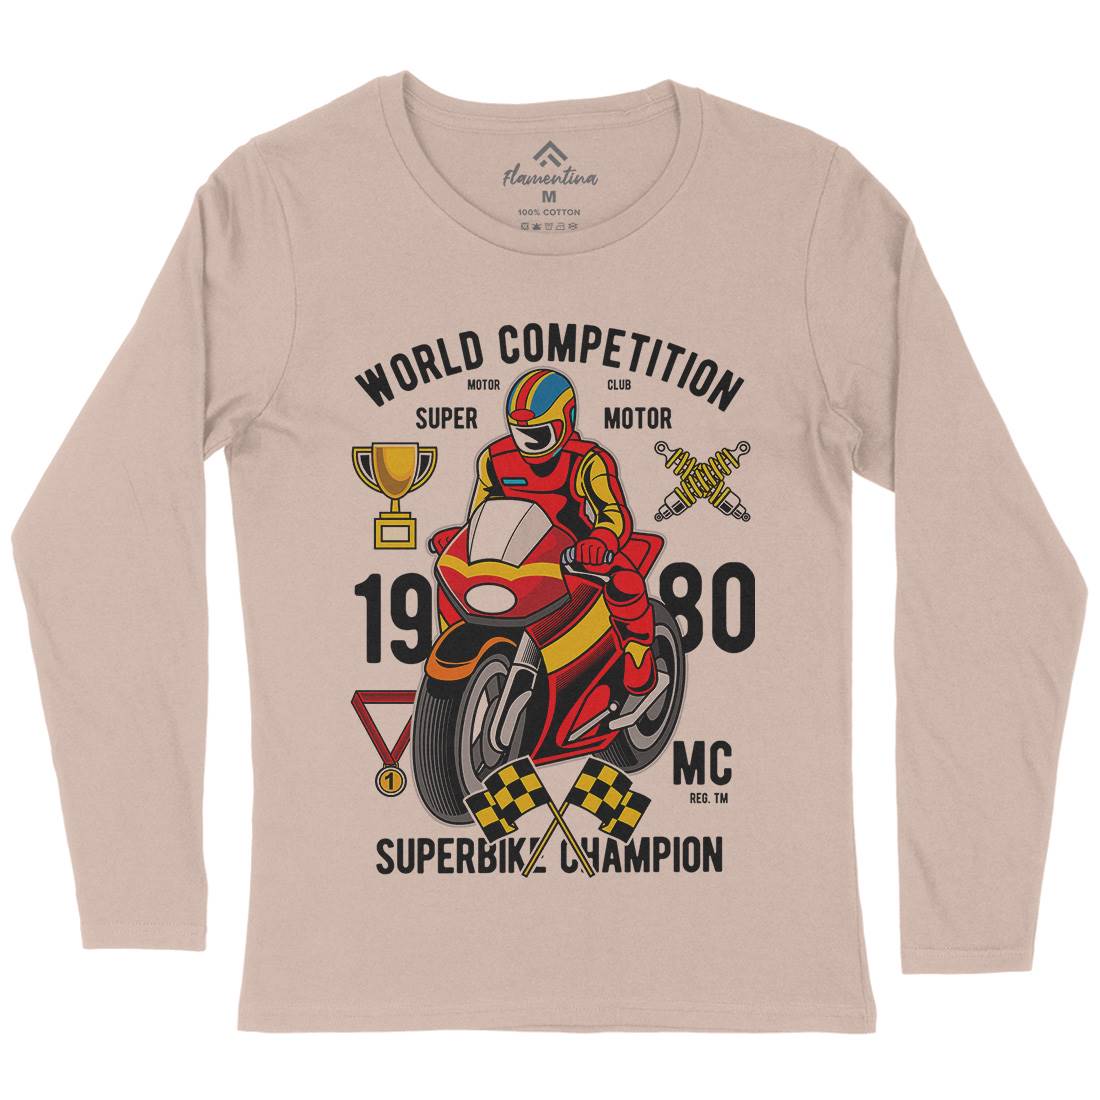 Super Bike World Competition Womens Long Sleeve T-Shirt Motorcycles C458